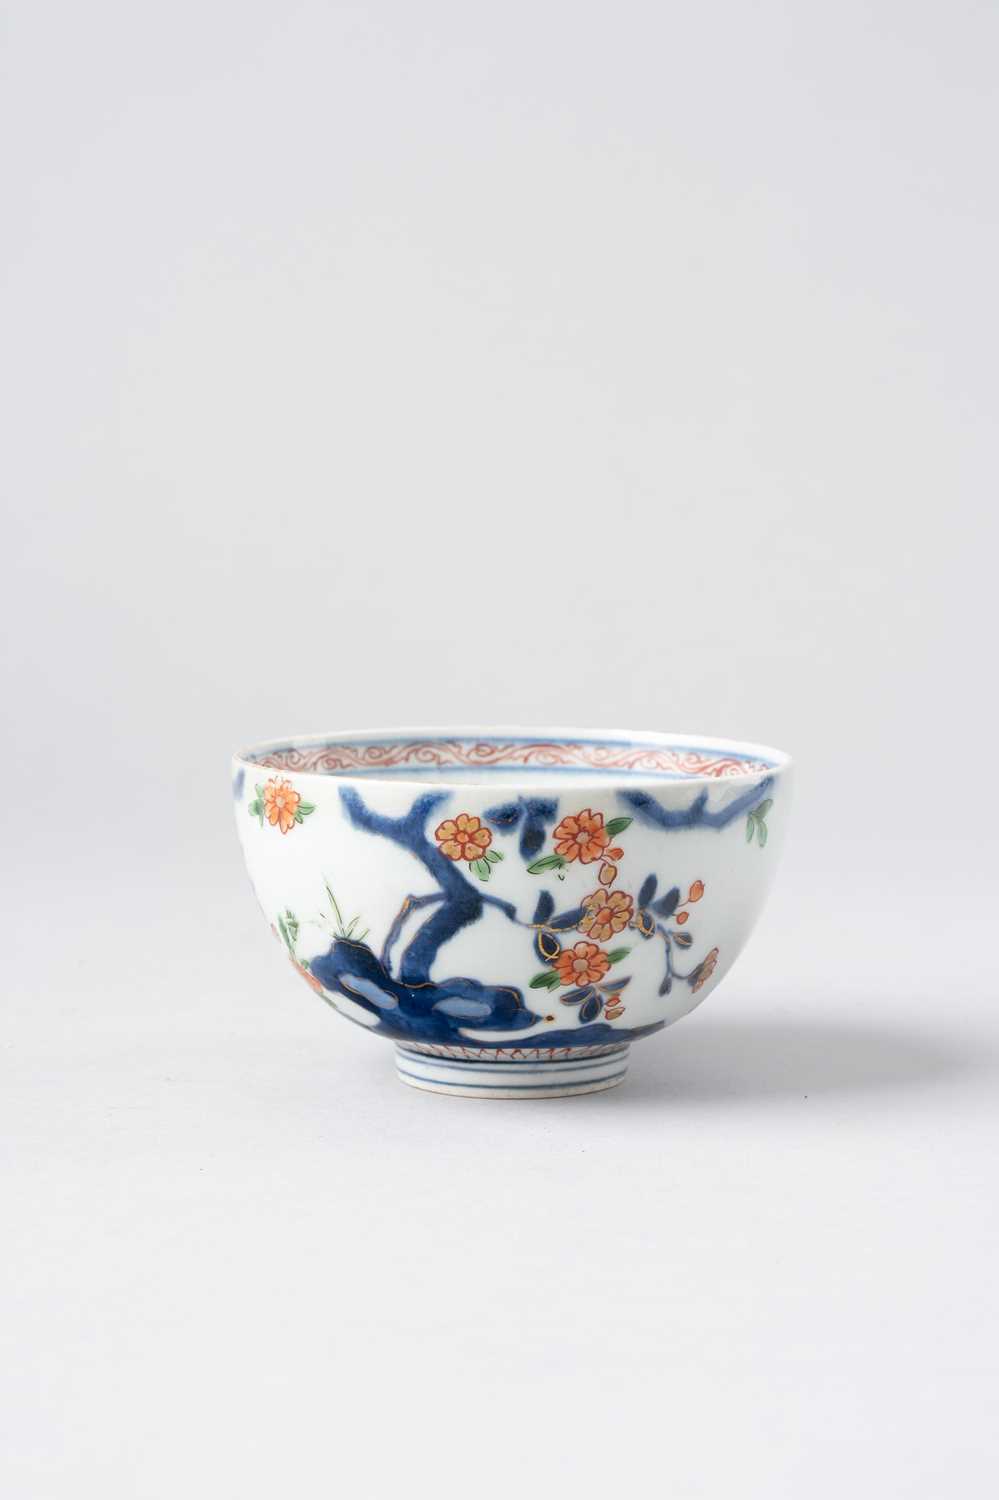 NO RESERVE A JAPANESE IMARI BOWL EDO PERIOD, C.1700 The exterior painted with flowering prunus and